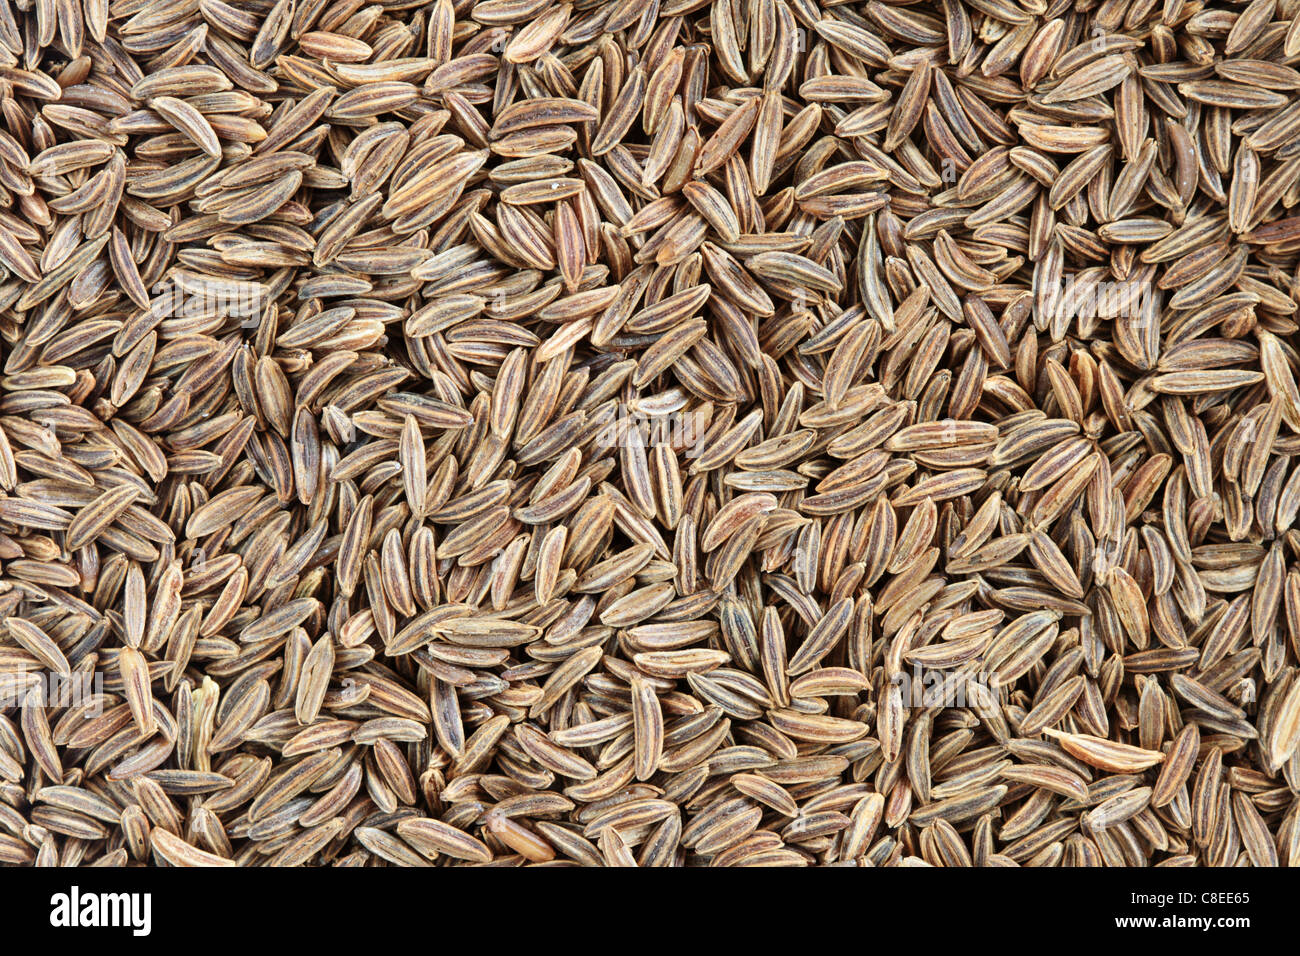 macro image of caraway seeds for background use Stock Photo